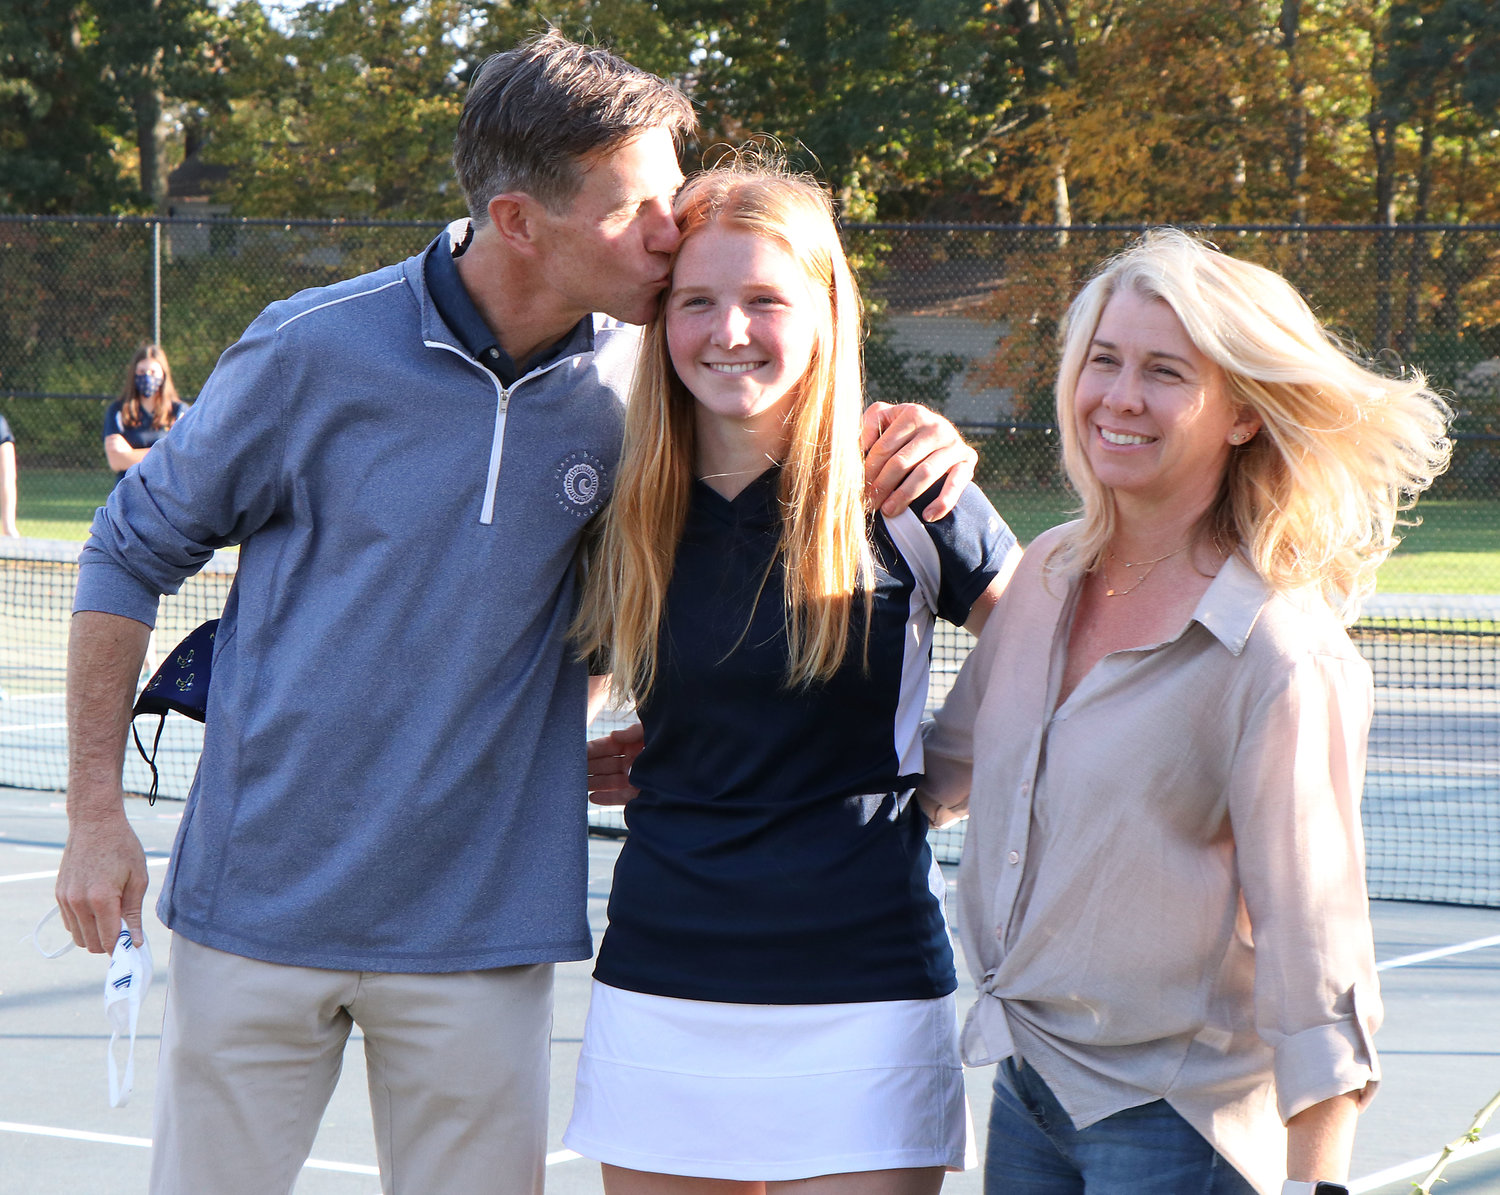 Meghan McDermott brings a flower and poses with parents Chris and Kim McDermott during a short senior ceremony at the courts on Friday afternoon.